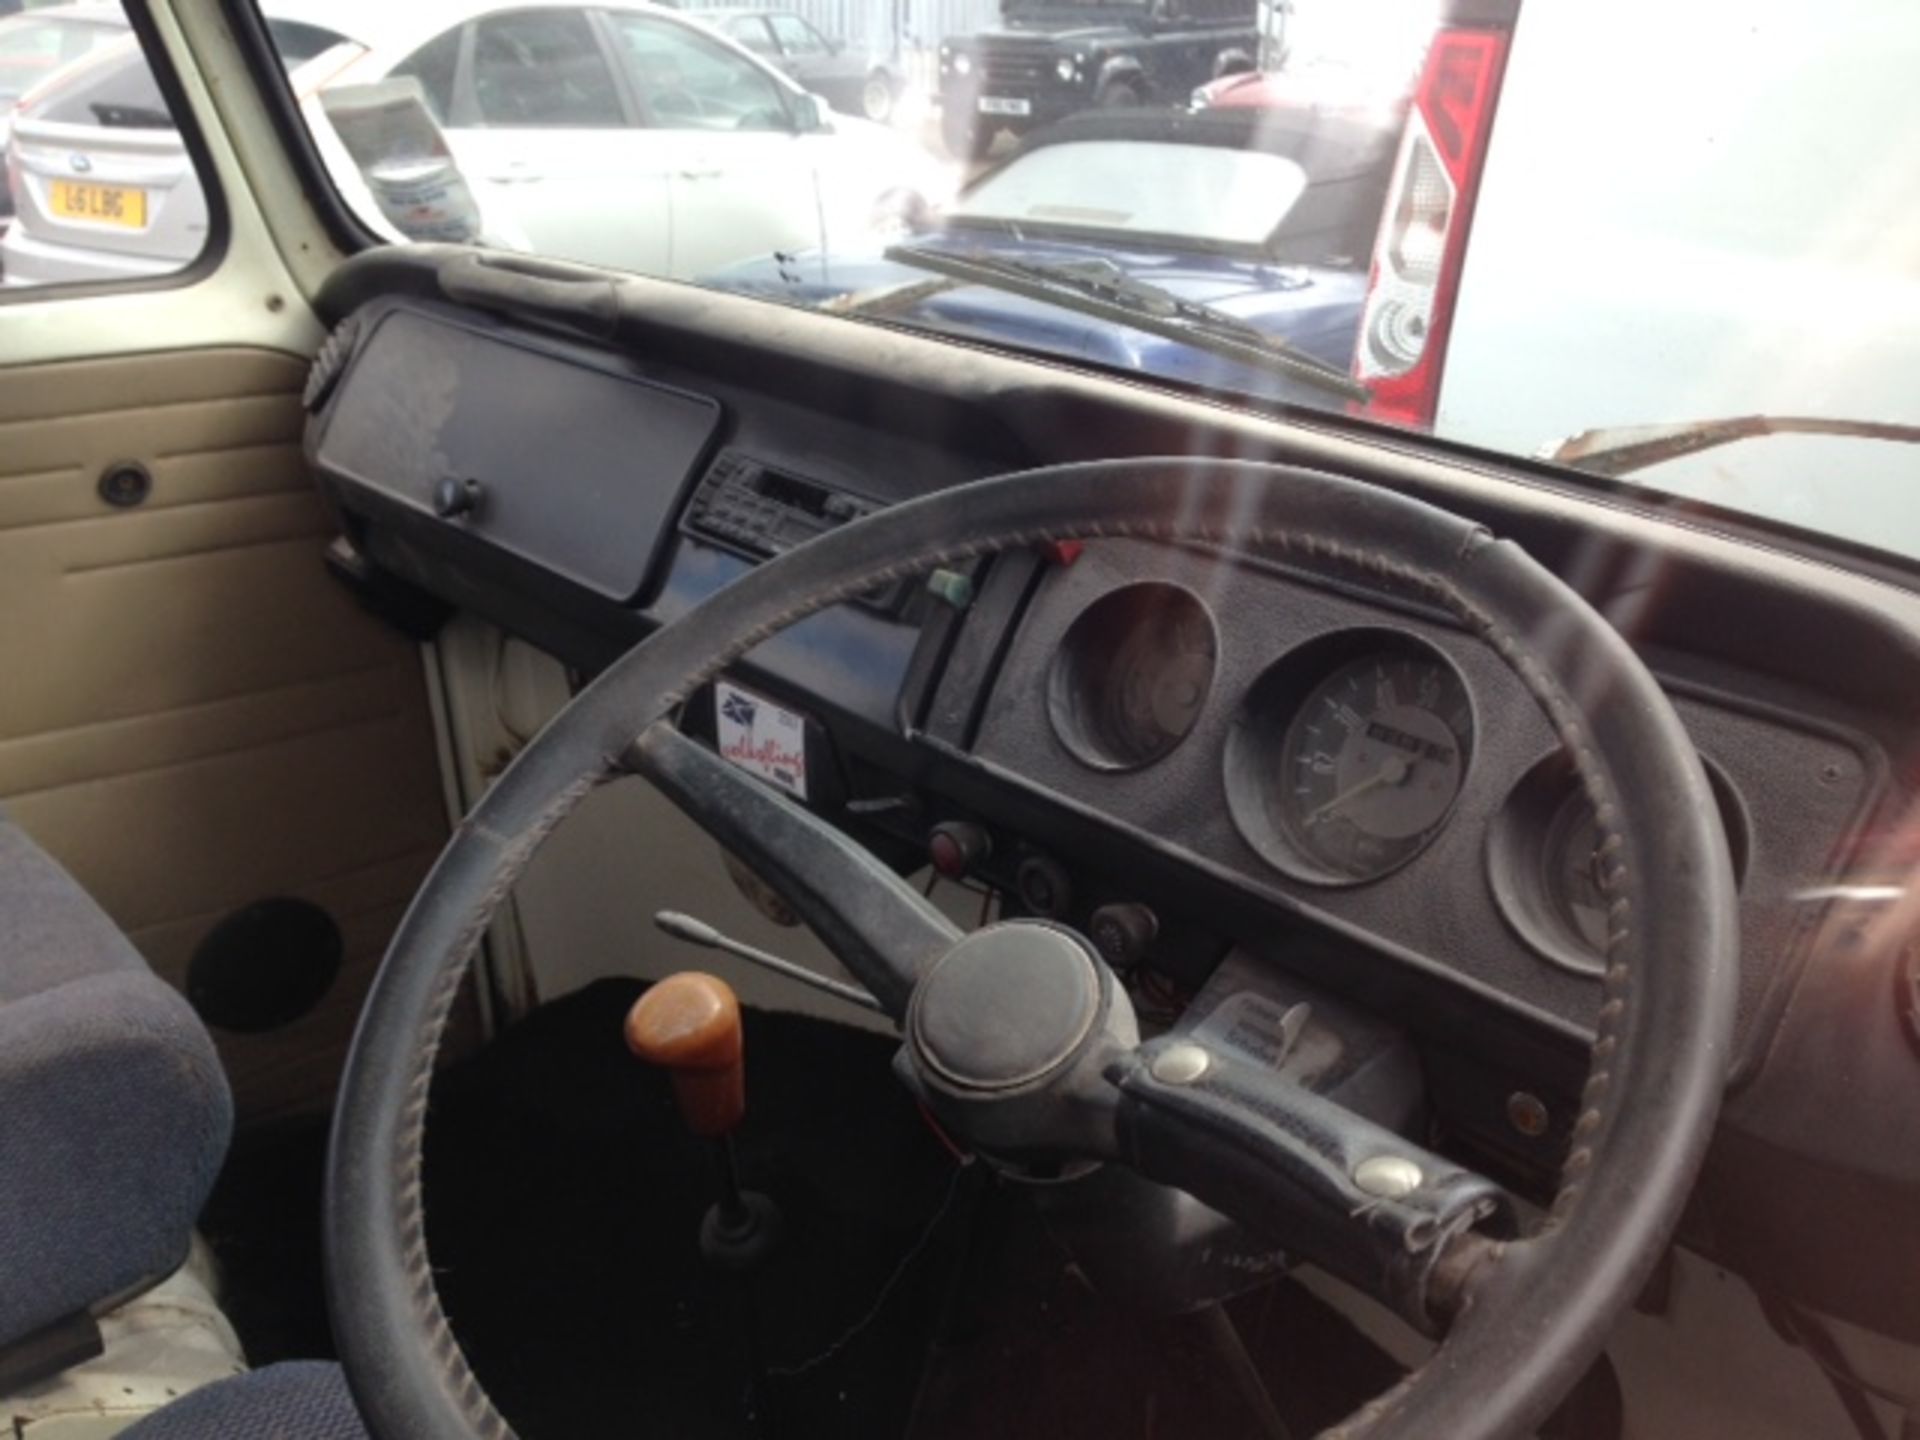 VOLKSWAGEN, T2 - 1584cc, Chassis number 2322053753 - this example requires restoration but appears - Image 11 of 12